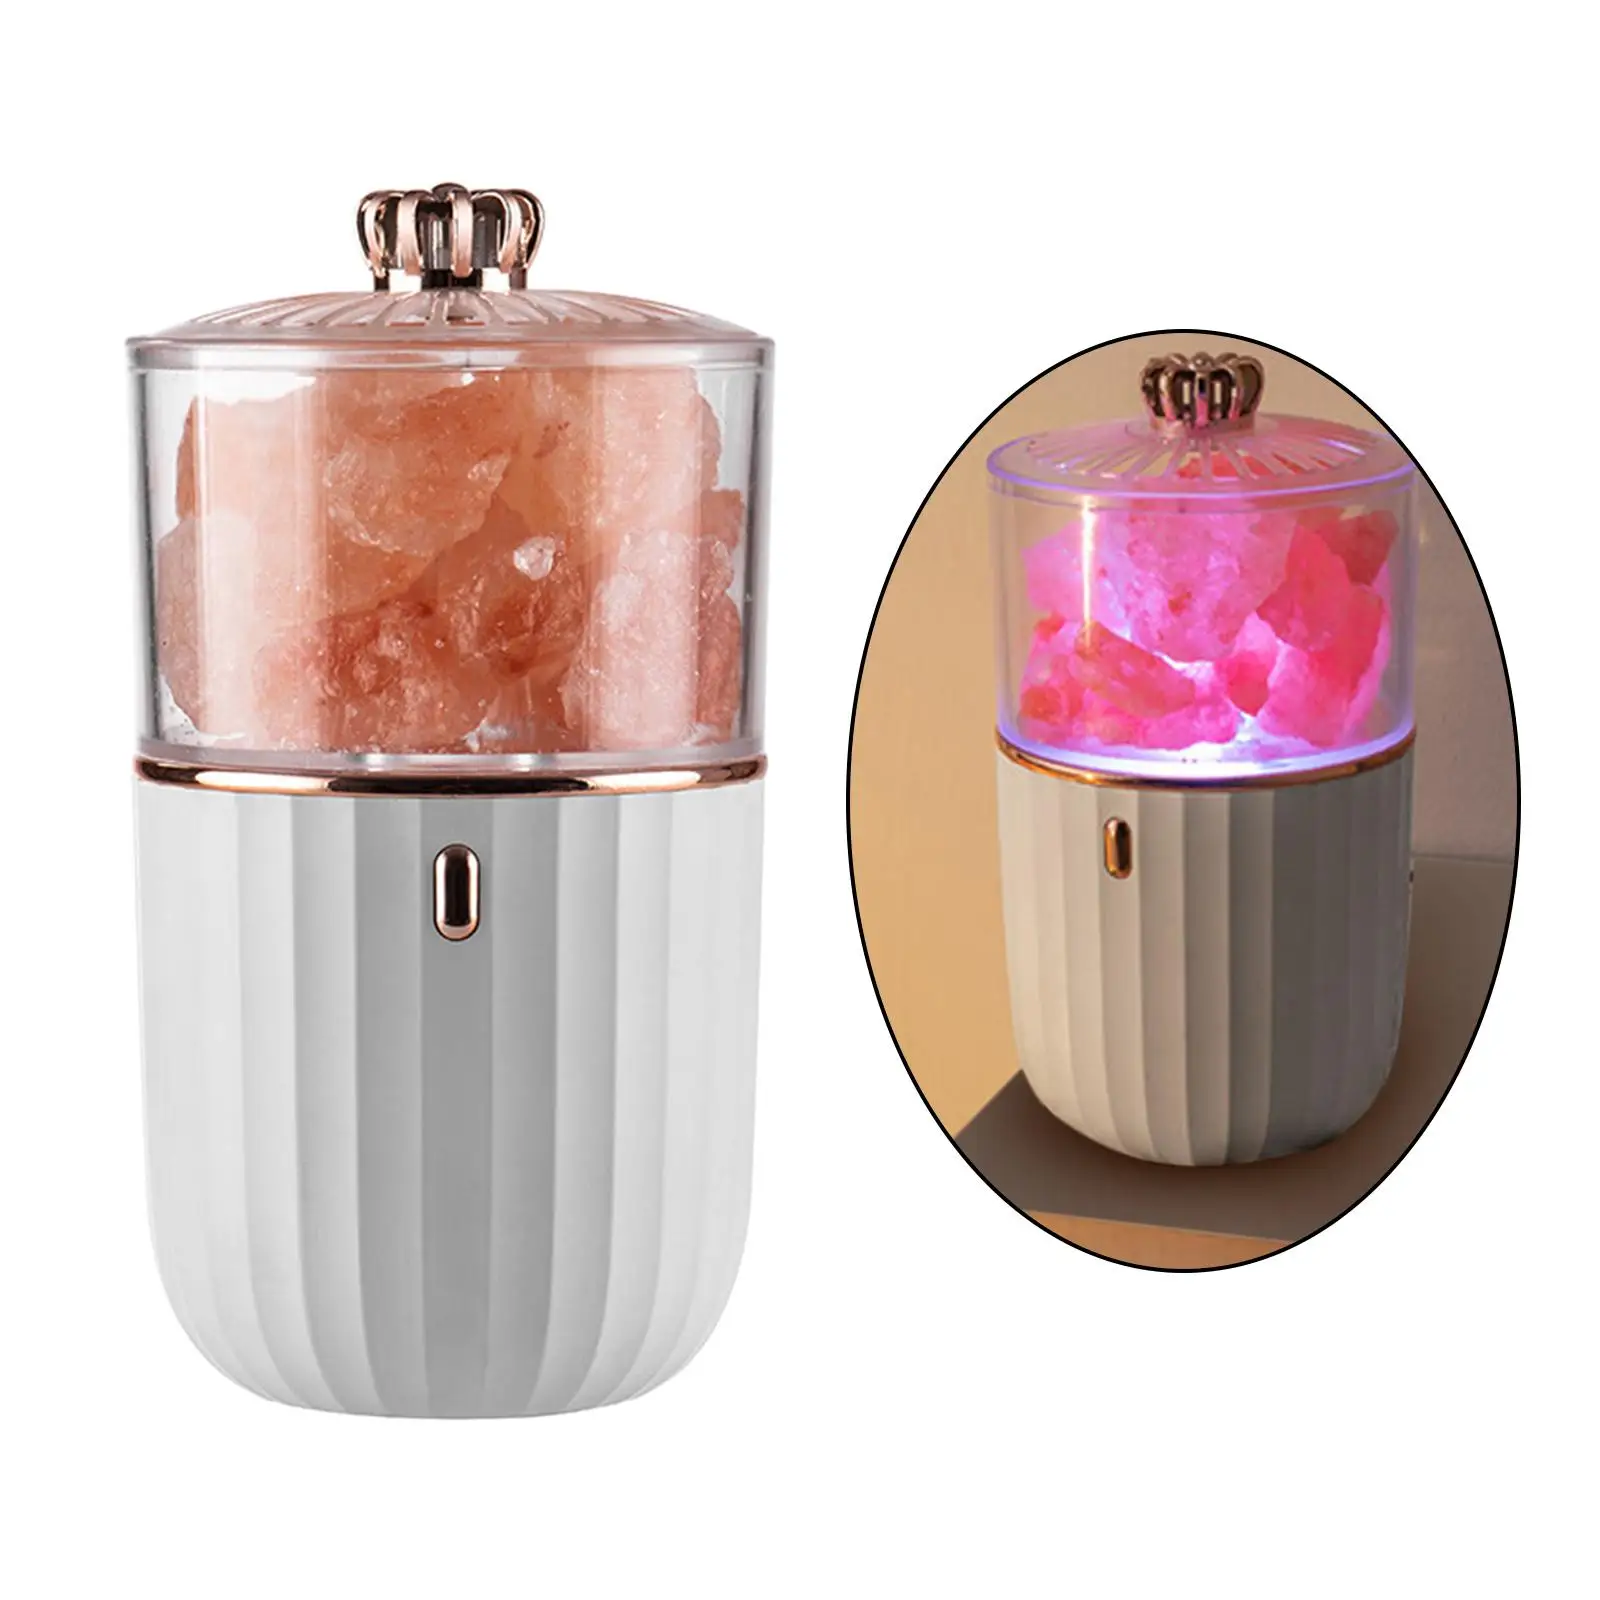 Himalayan Salt Lamp Essential Oil Diffuser Quiet with 7 LED Light 2 in 1 for Office